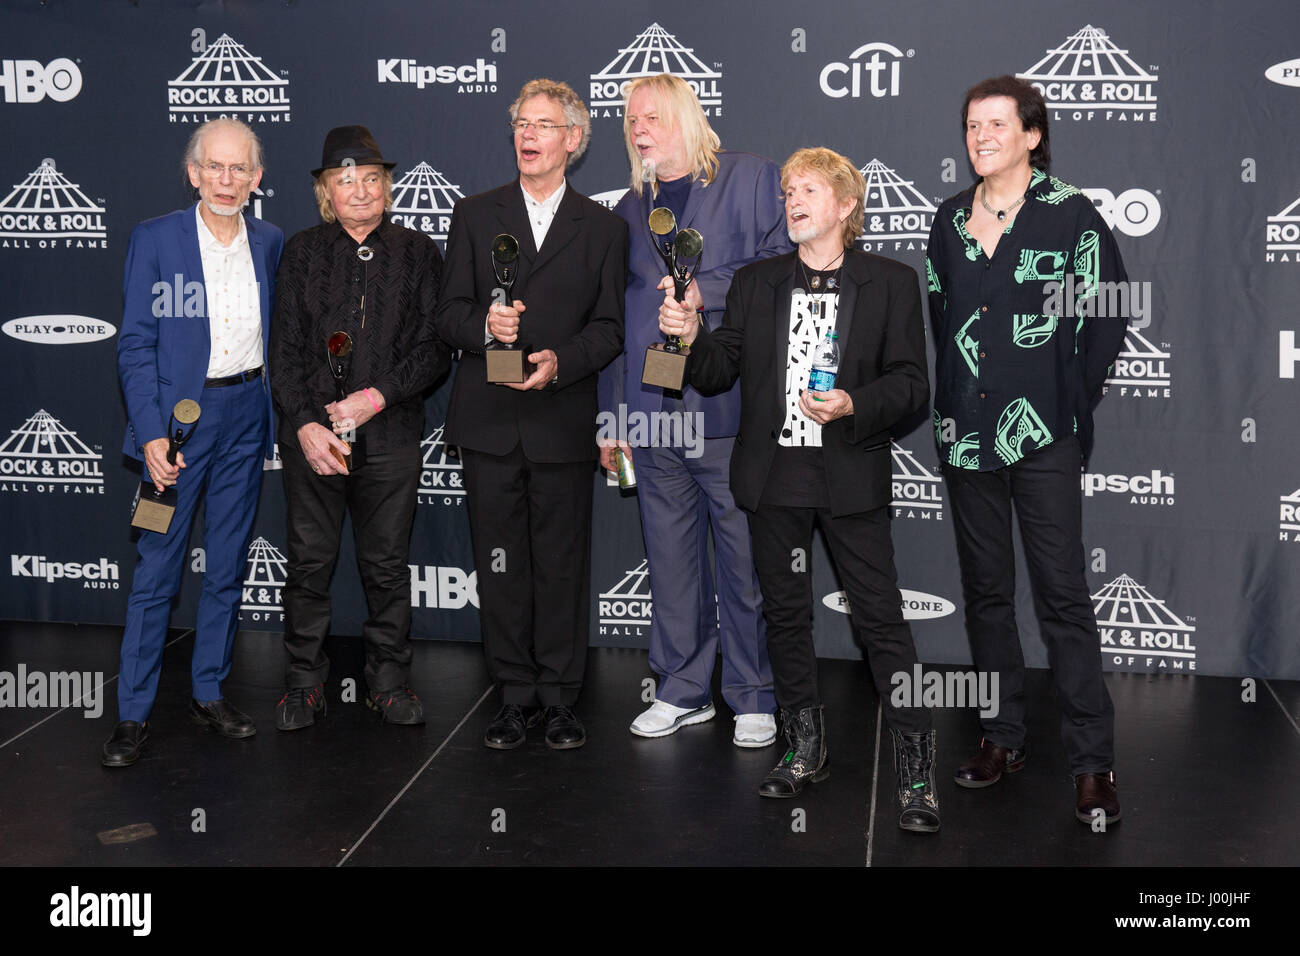 Brooklyn, New York, USA. 7th Apr, 2017. STEVE HOWE, ALAN WHITE, TONY KAYE, RICK WAKEMAN, JON ANDERSON and TREVOR RABIN of Yes walk the red carpet at Barclay's Center during the Hall of Fame Induction ceremony in Brooklyn, New York Credit: Daniel DeSlover/ZUMA Wire/Alamy Live News Stock Photo